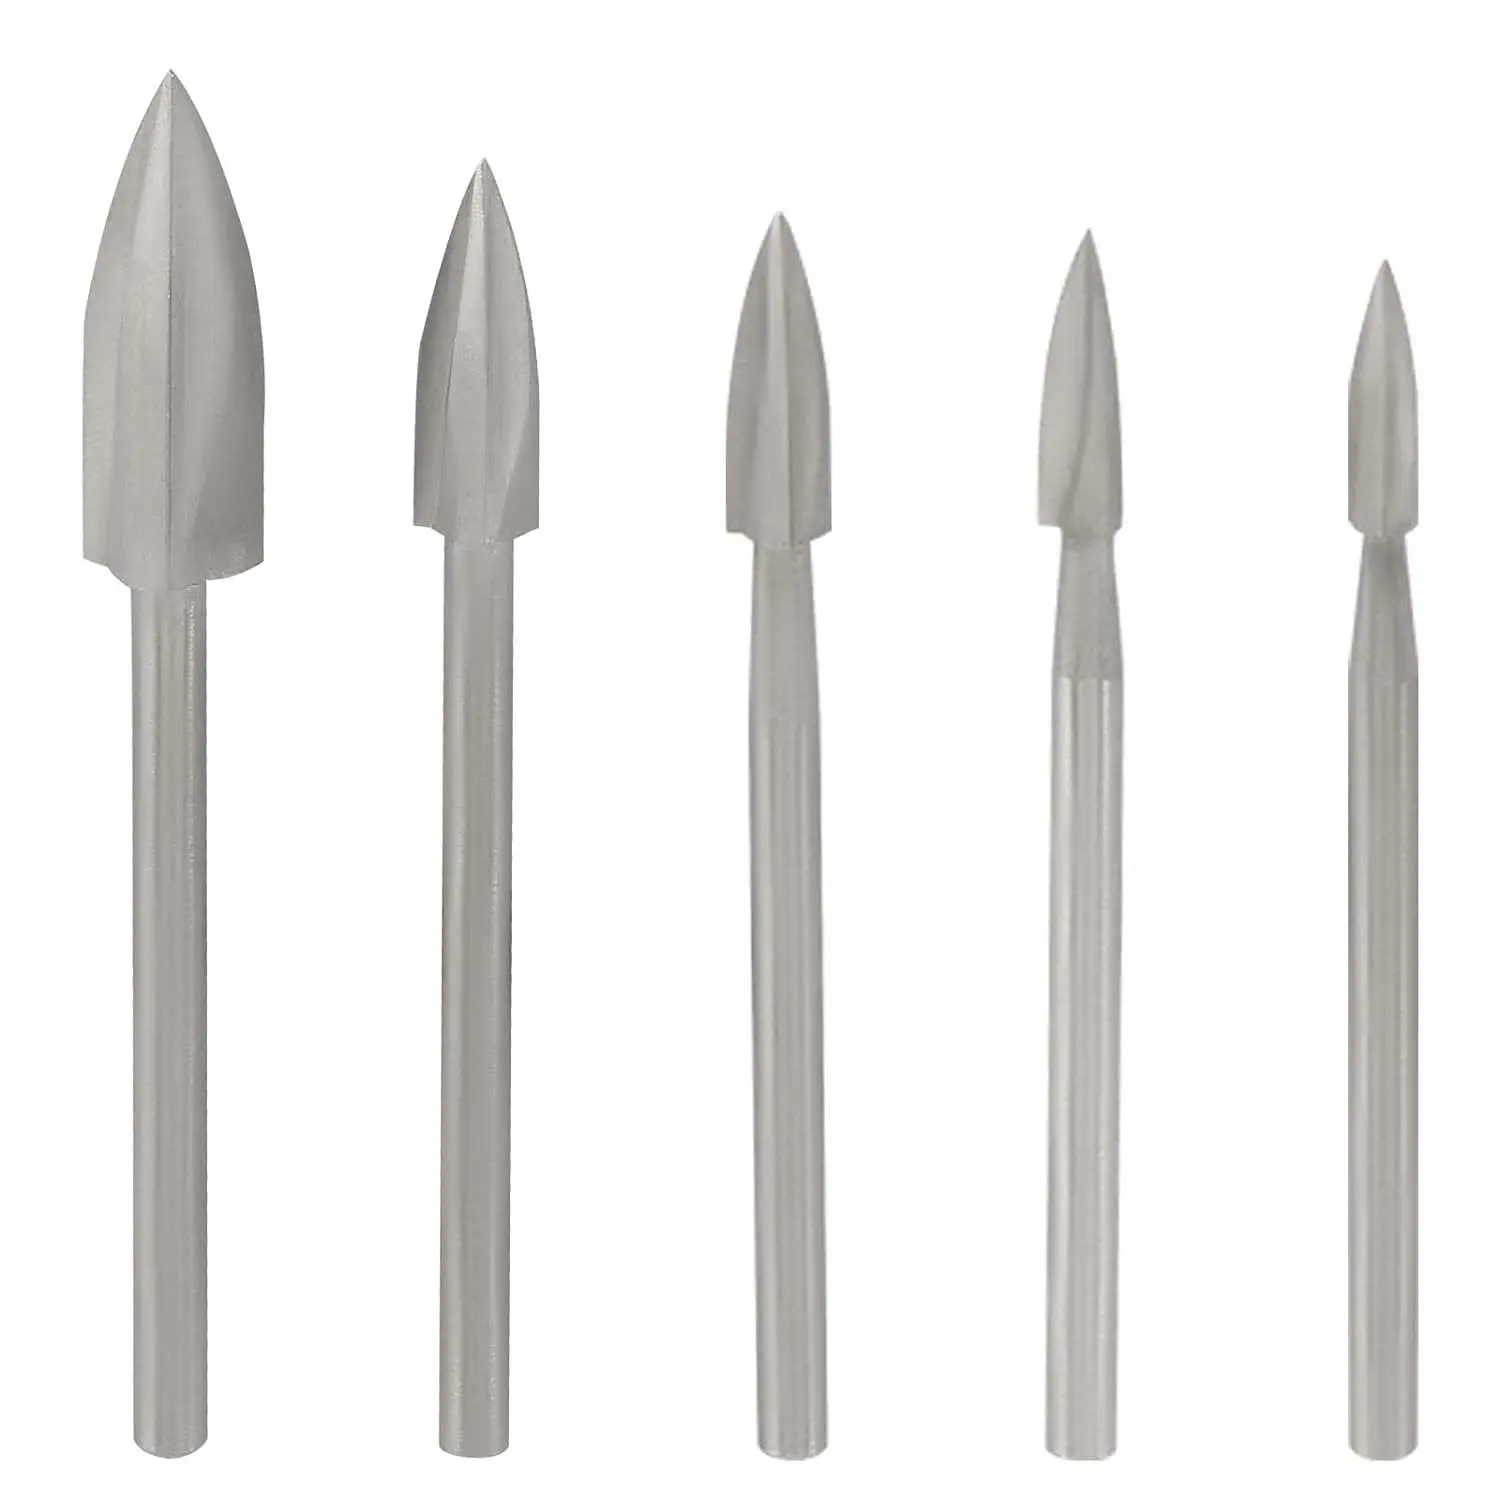 5pcs 10pcs High Speed Steel Grinding Wood Crafts Rotary Tool Wood Carving Drill Bits Set